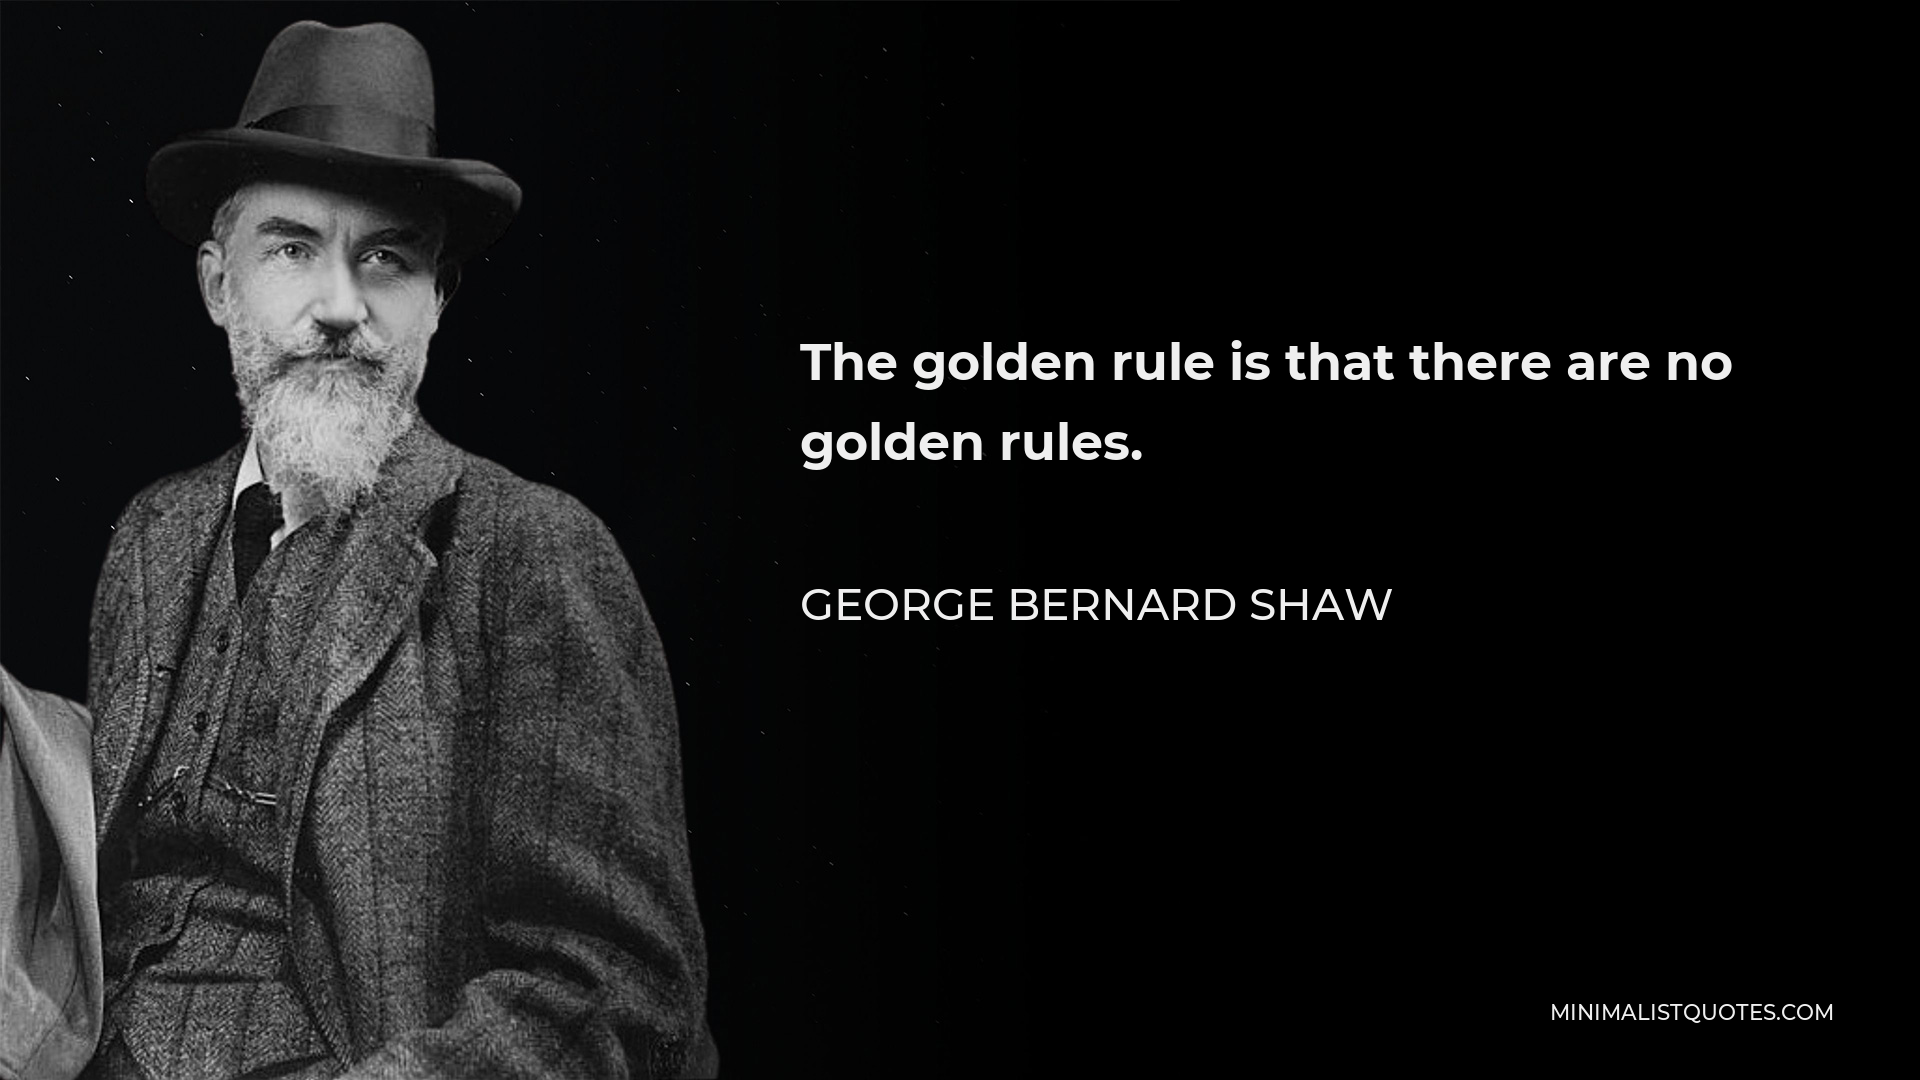 George Bernard Shaw Quote - The golden rule is that there are no golden rules.